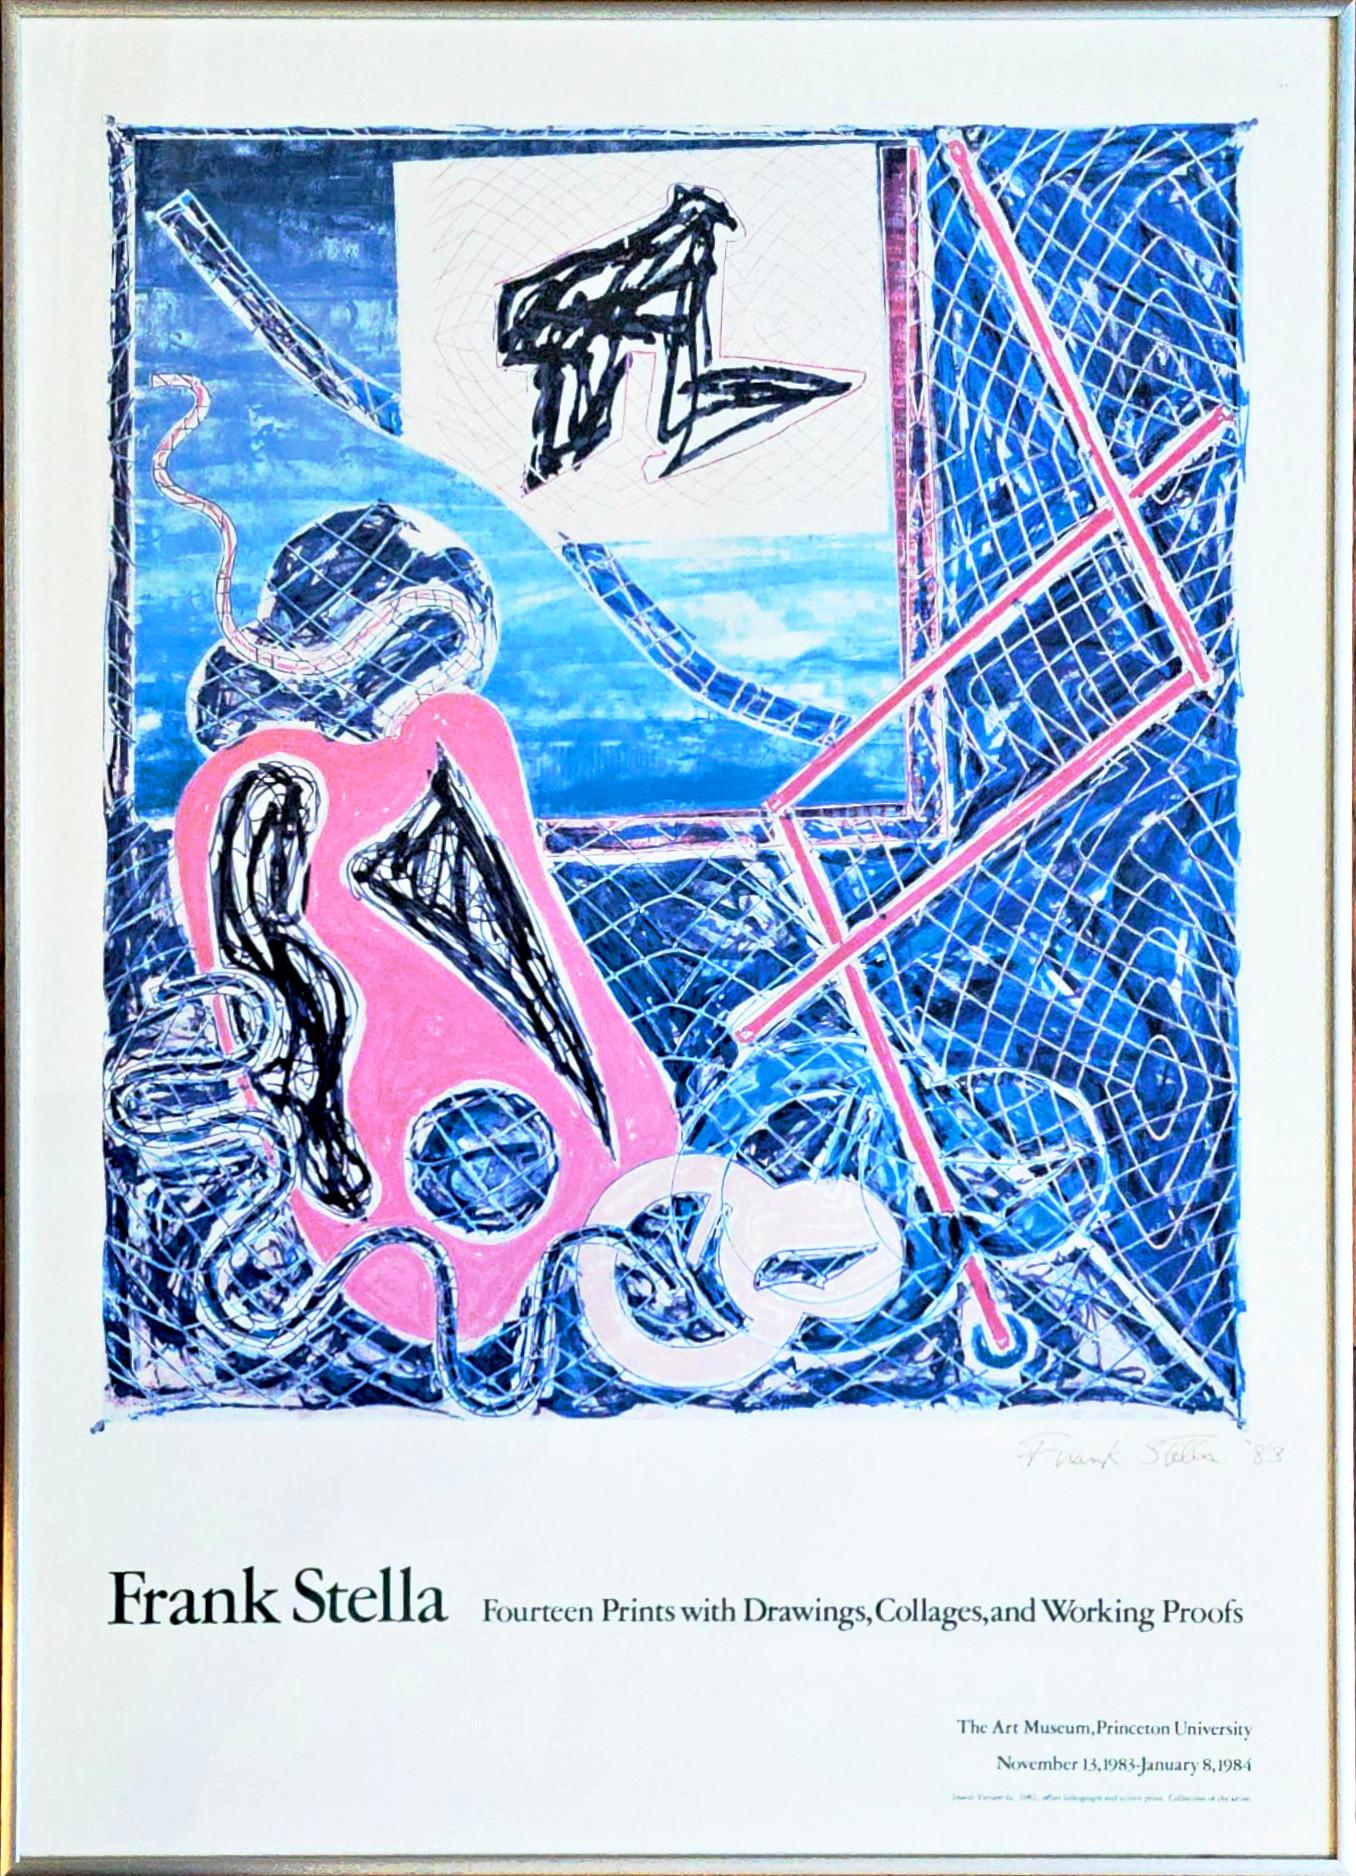 Rare Lt. Ed Princeton Art Museum Poster (Hand signed and dated by Frank Stella)